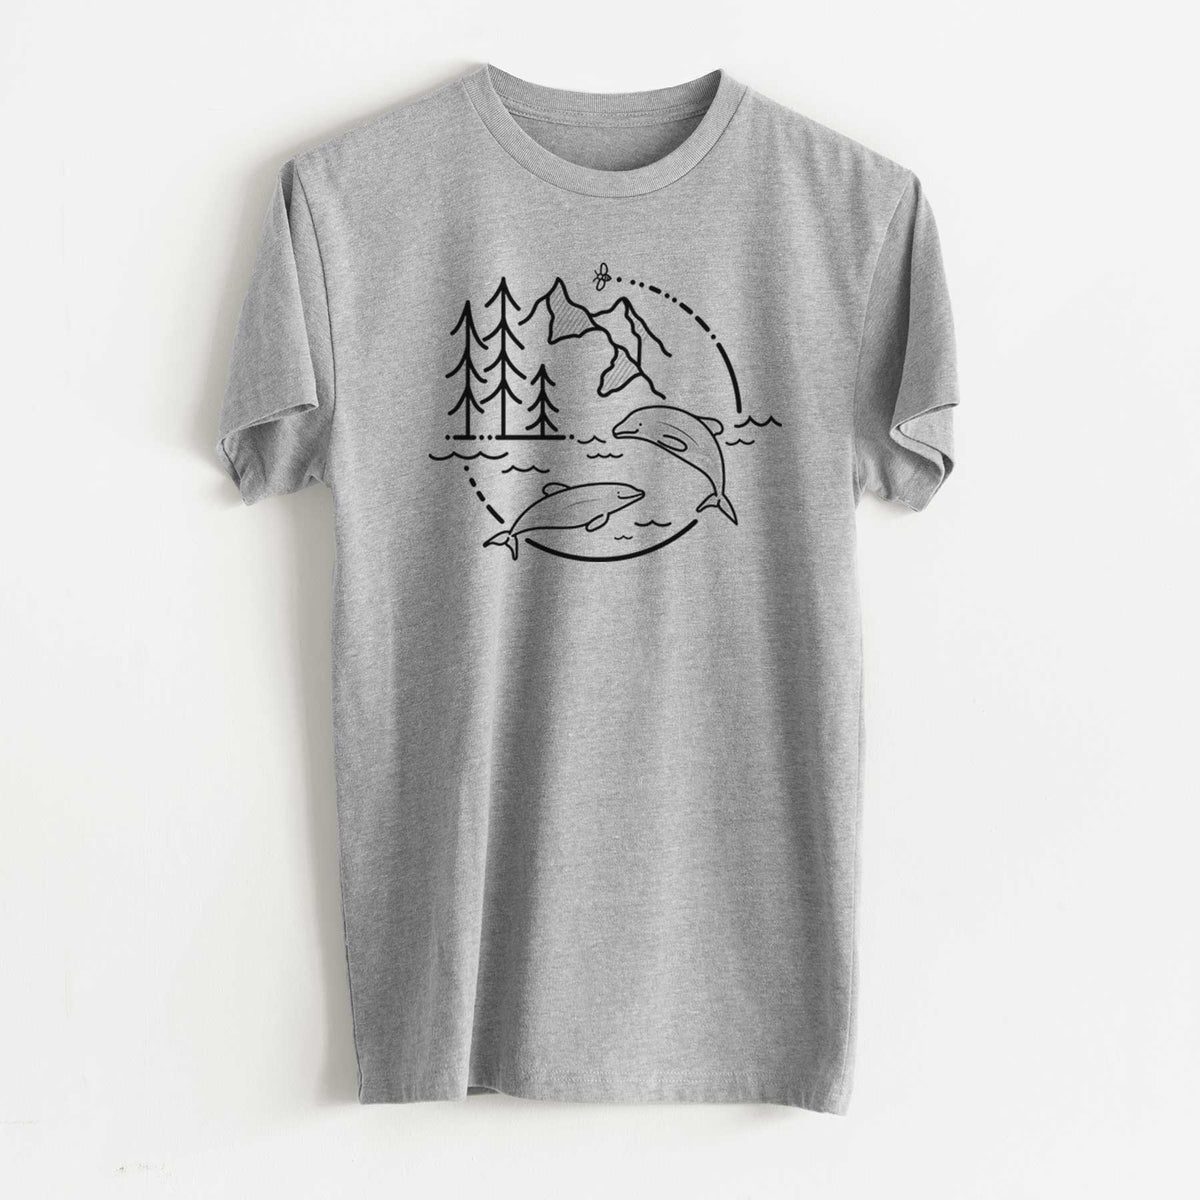 It&#39;s All Connected - Maui Dolphins - Unisex Recycled Eco Tee  - CLOSEOUT - FINAL SALE